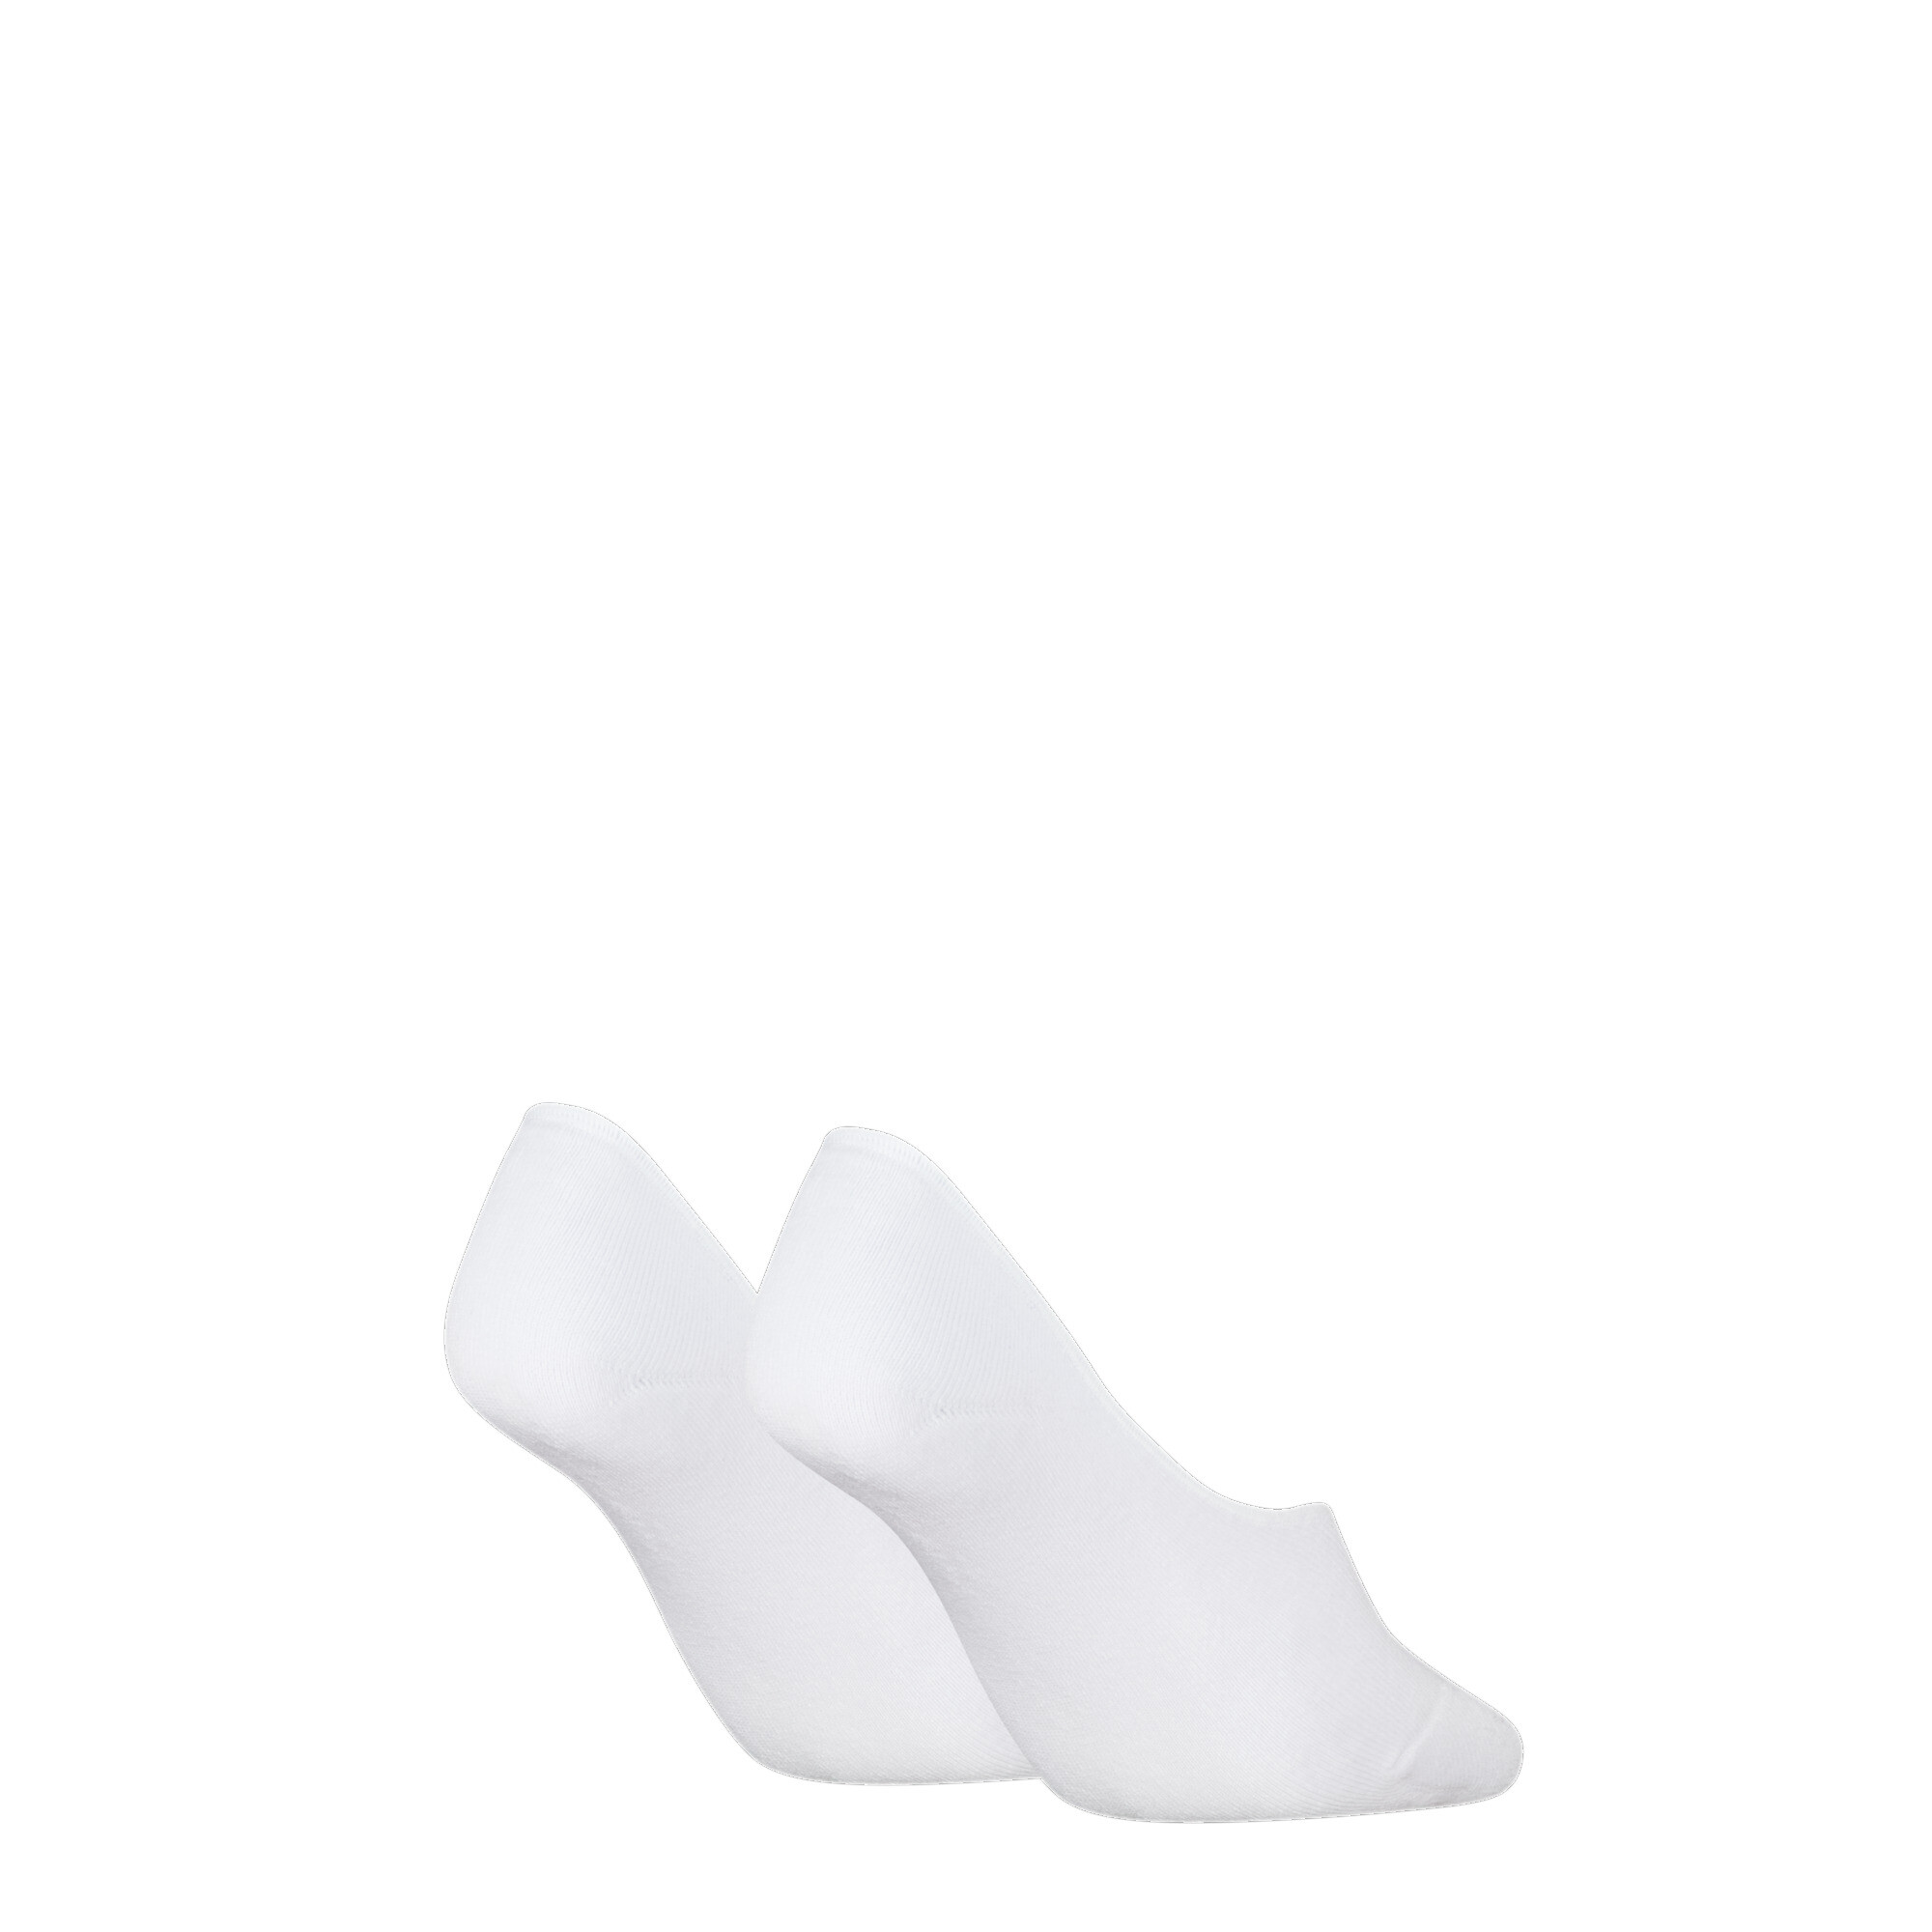 Women's Puma's Invisible Footie Socks 2 Pack, White, Size 35-38, Women